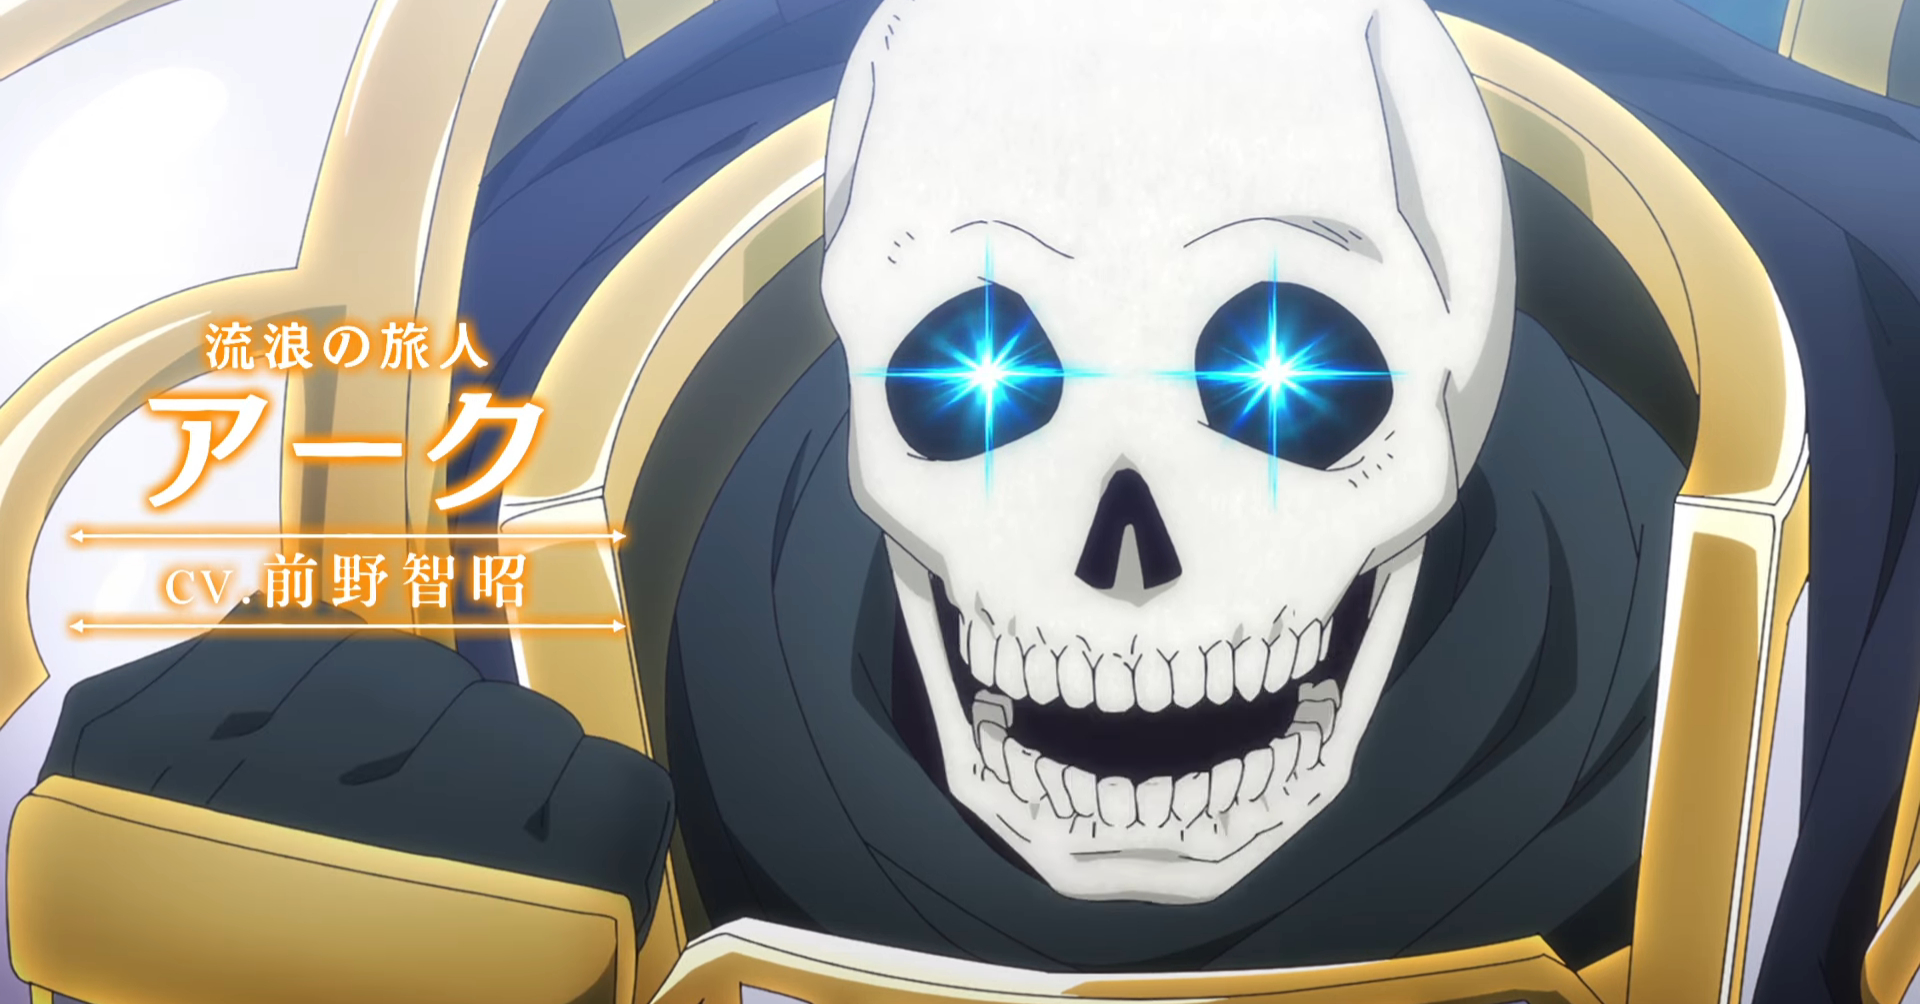 Skeleton Knight in Another World Reveals New Trailer, Cast and